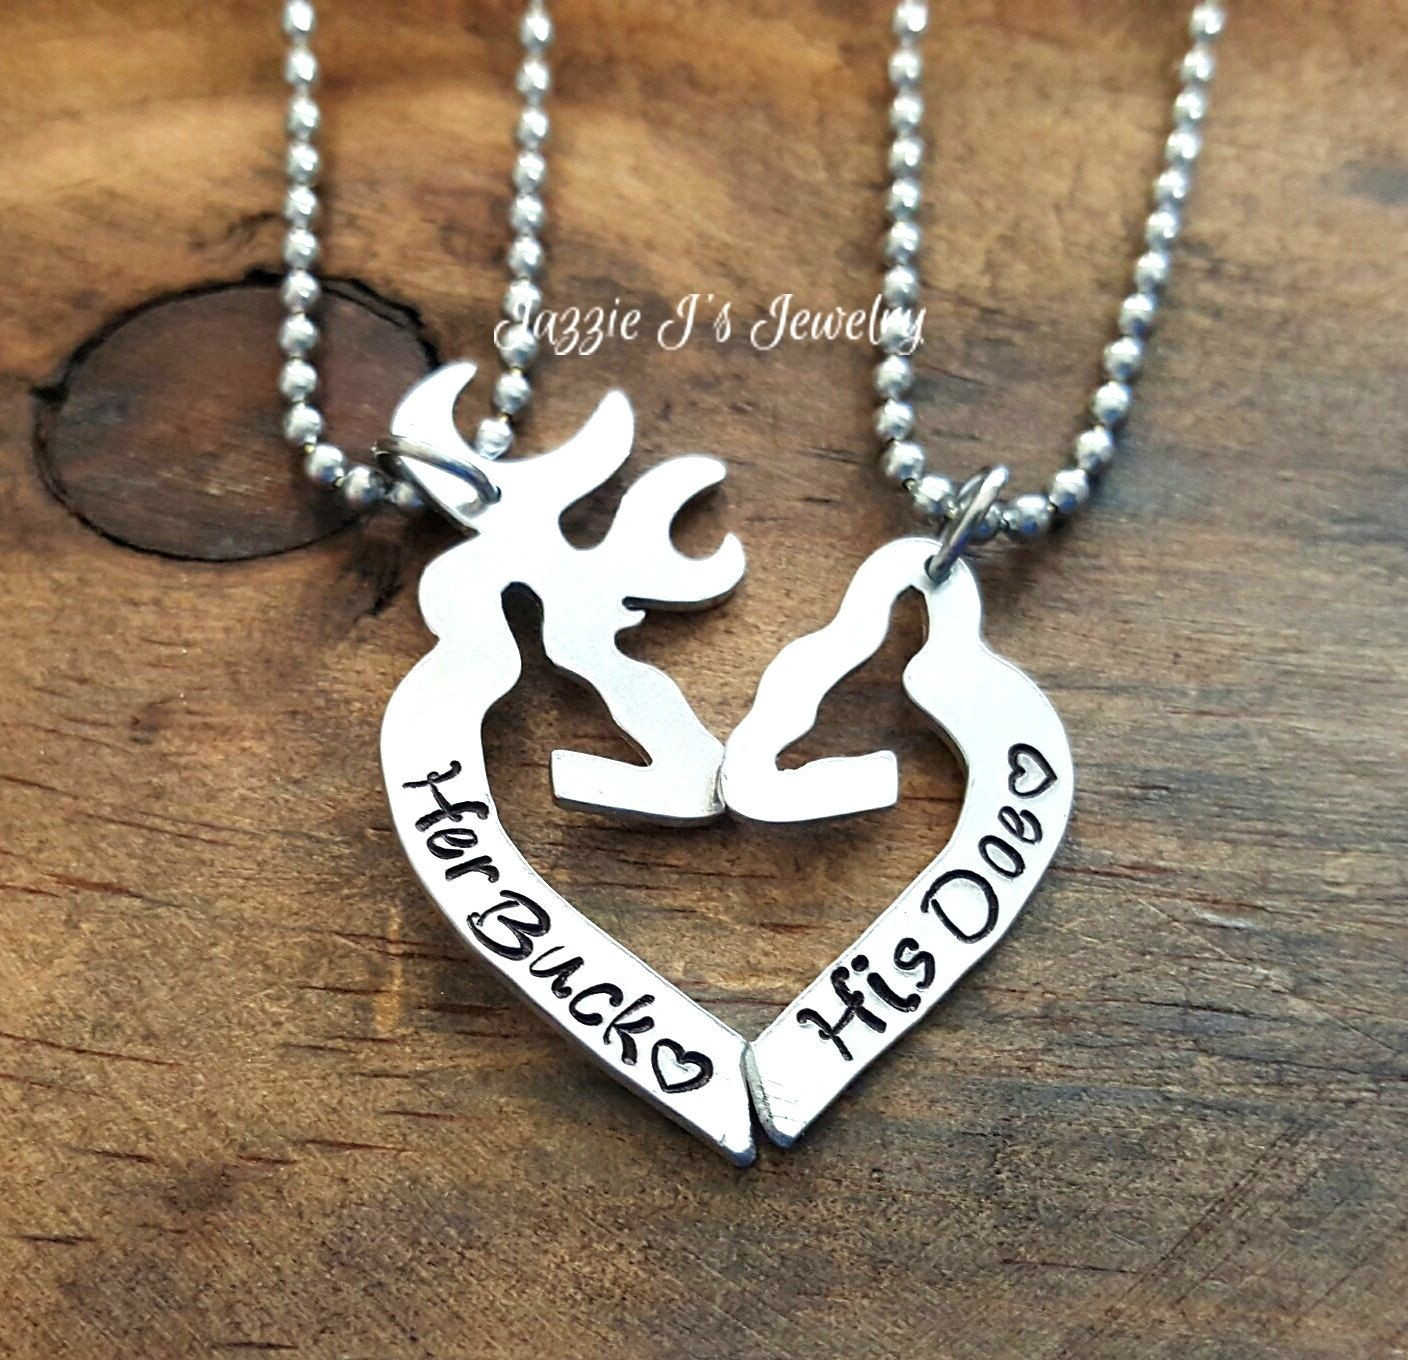 Personalized Couples Necklace Sets
 Her Buck His Doe Hand Stamped Necklace Set Personalized